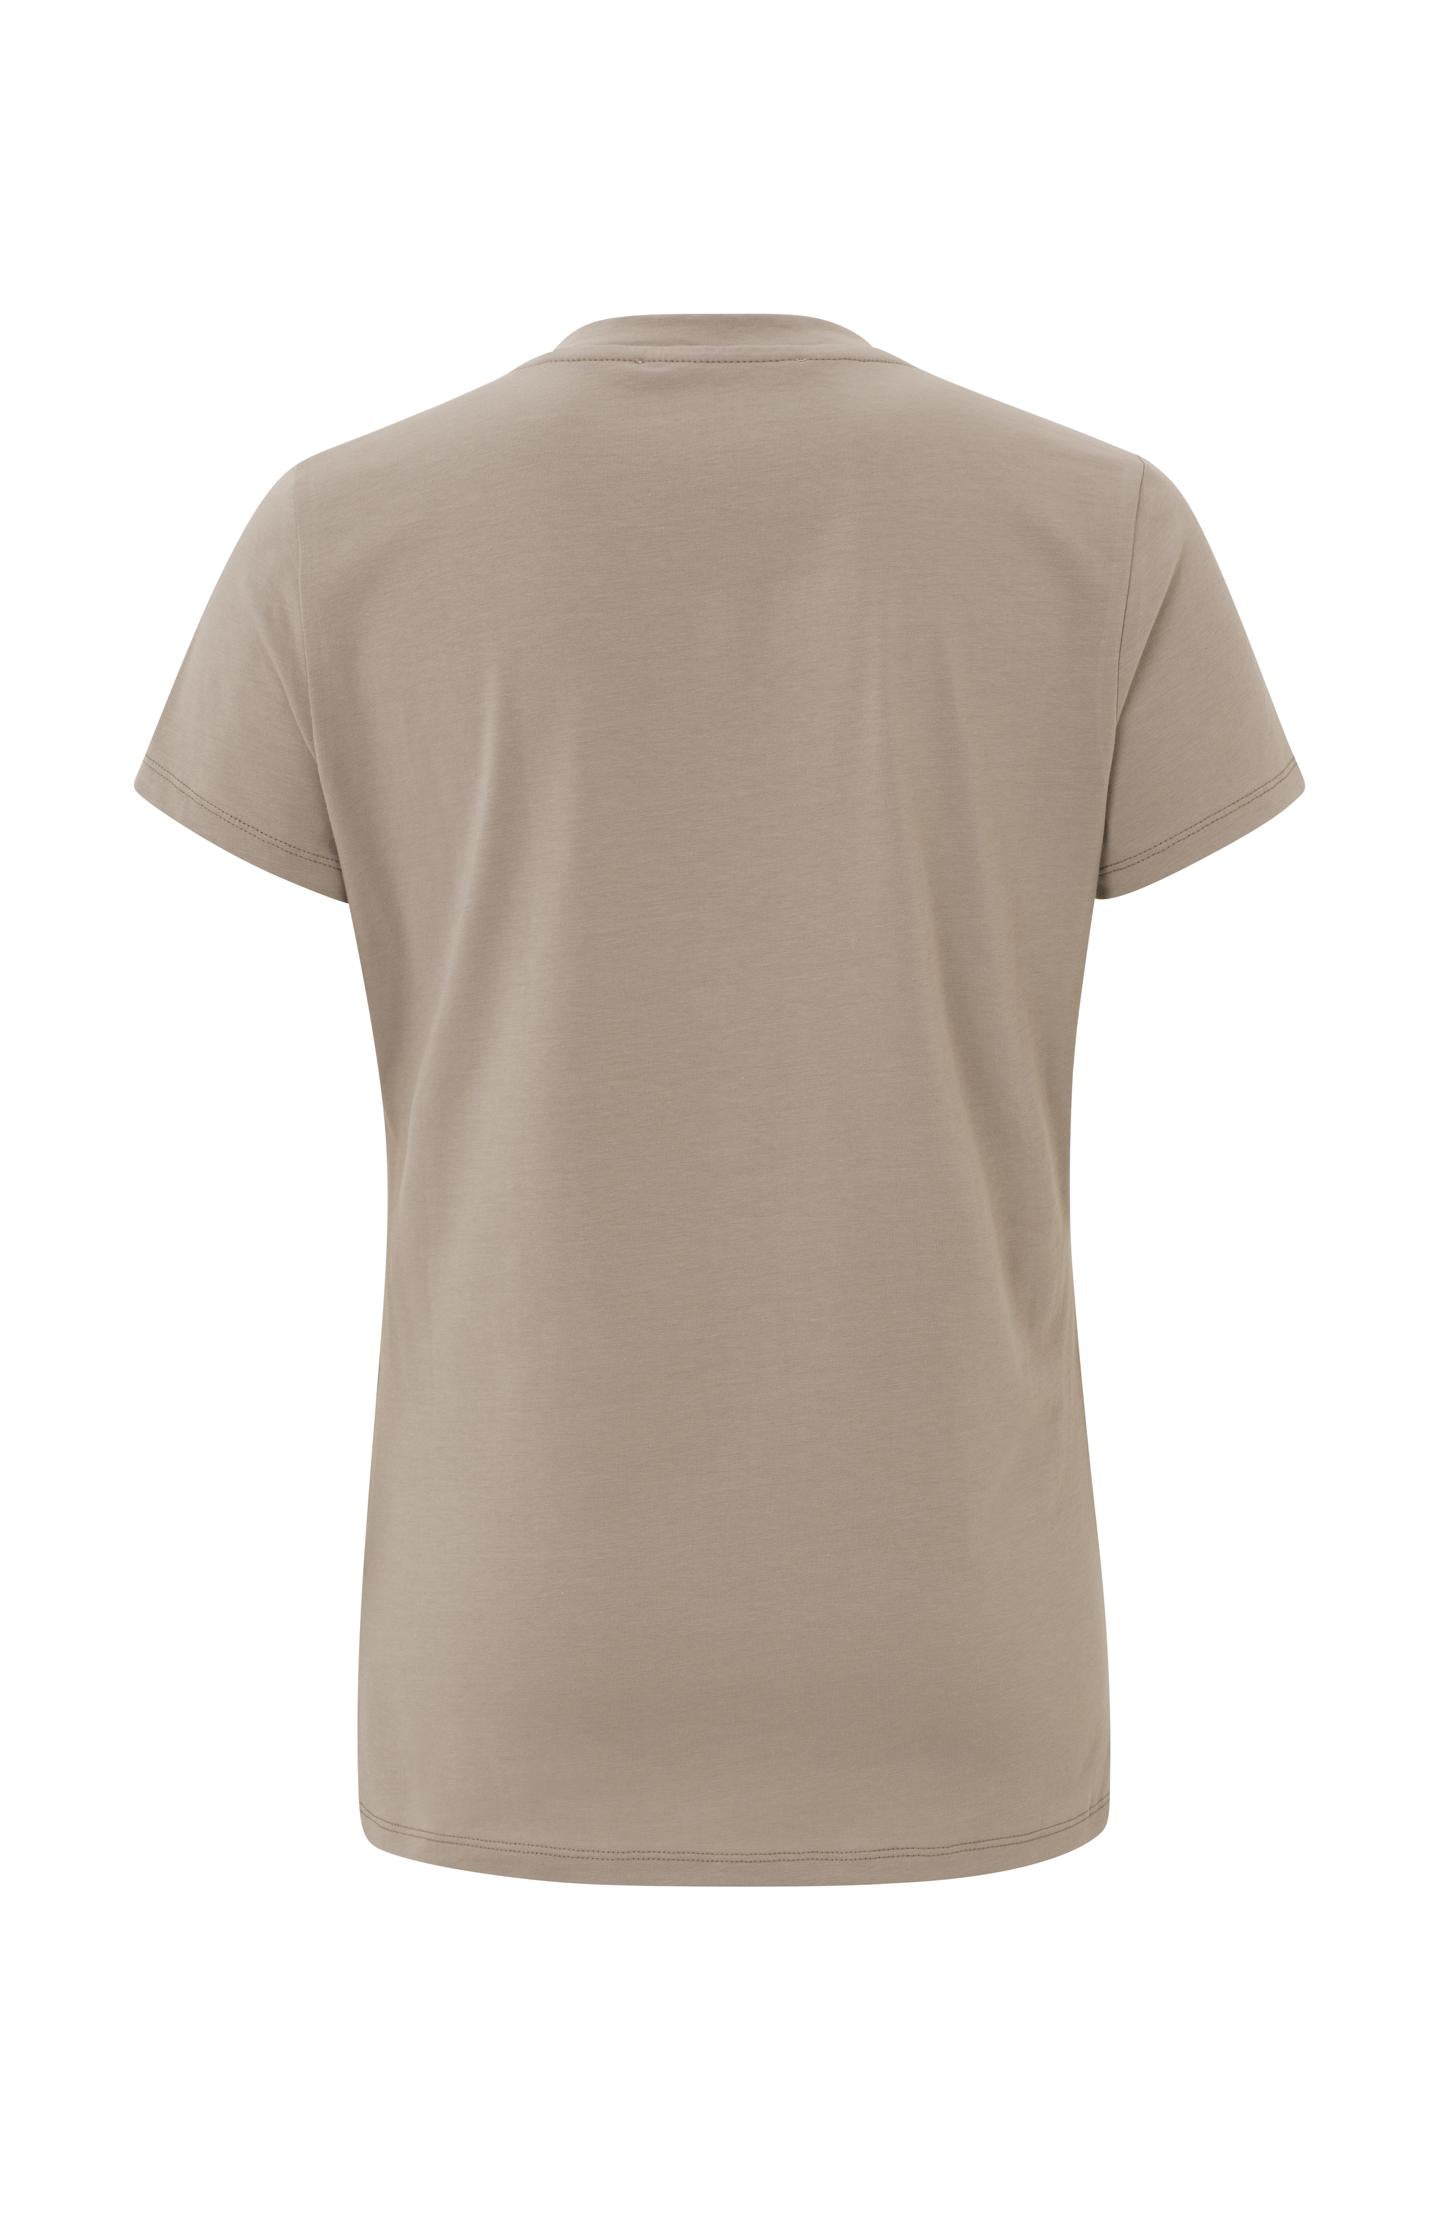 T-shirt with V-neck and short sleeves in regular fit